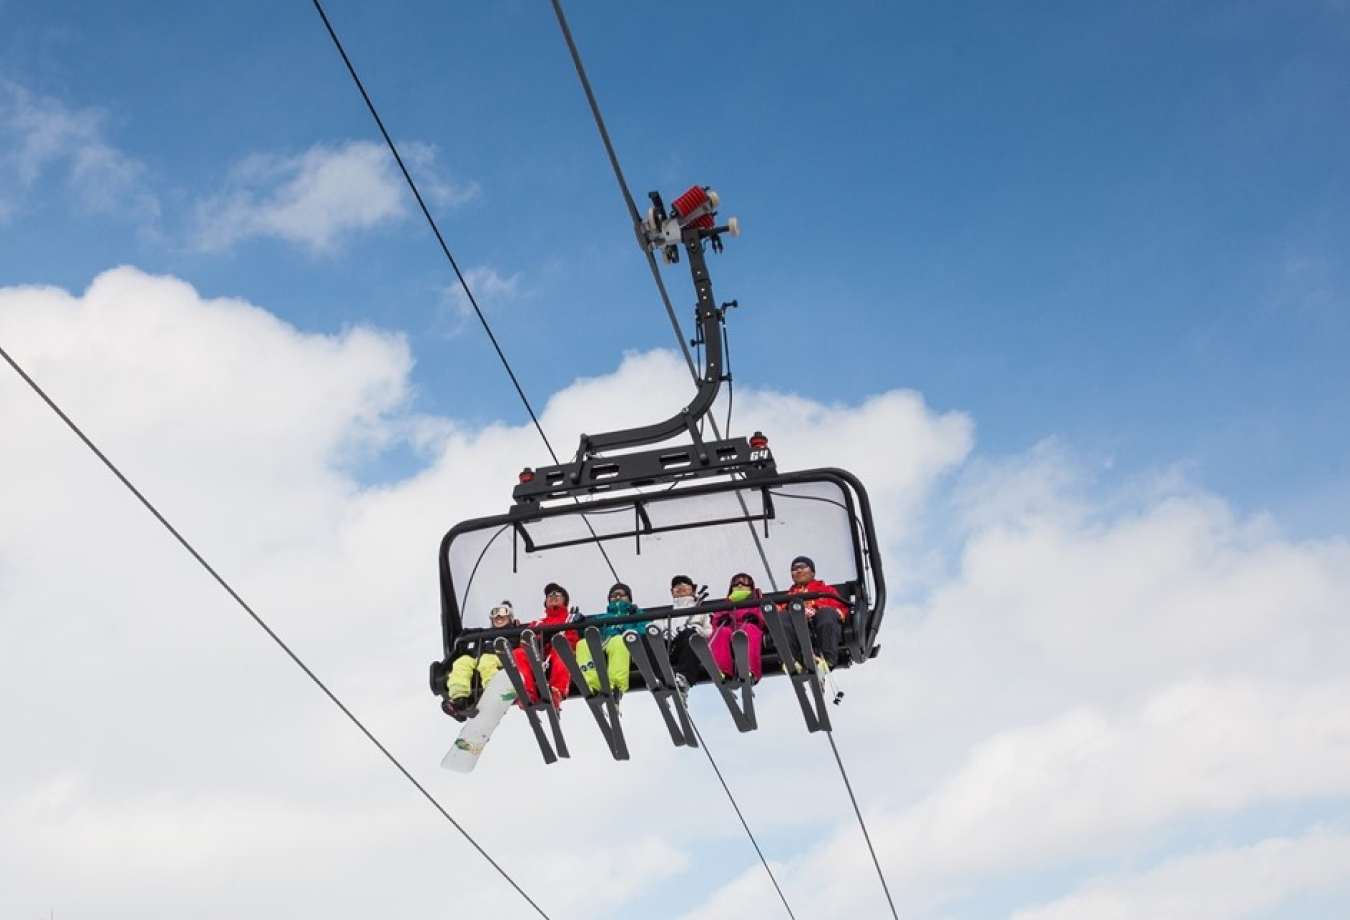 Chairlifts for traveling within mountain resorts that enable flexible layouts